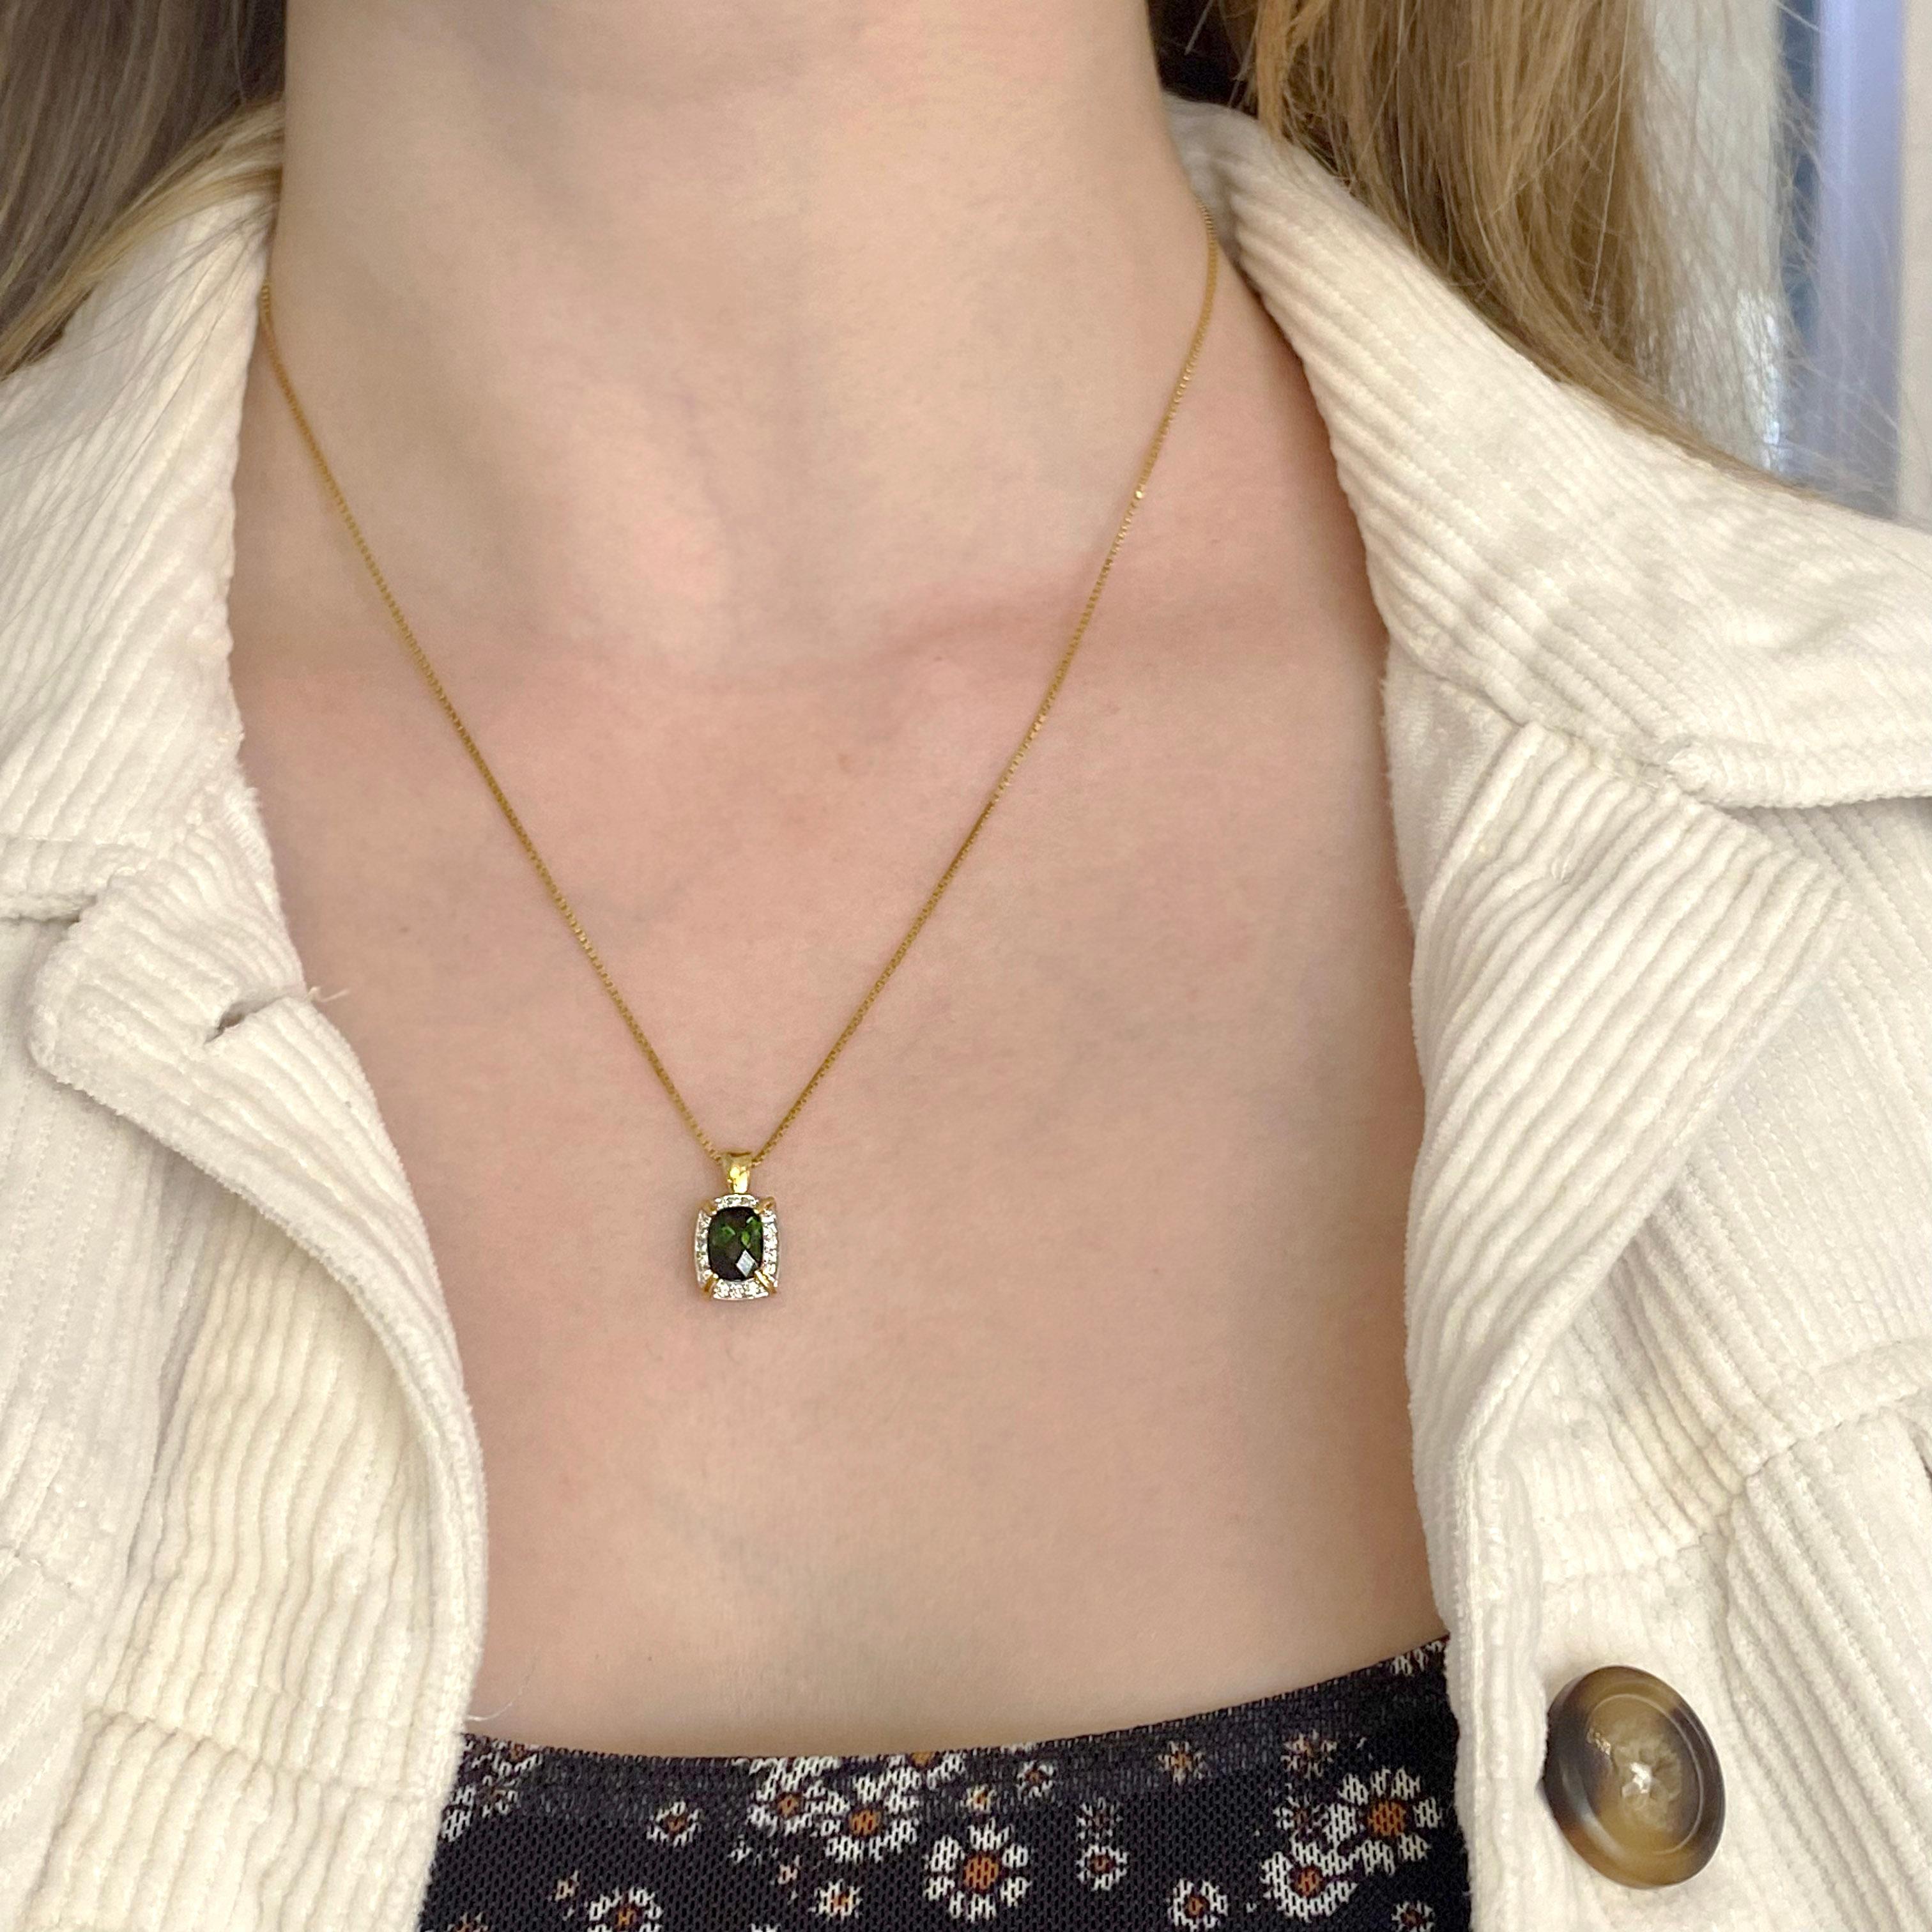 This stunning chrome tourmaline is set in a very unique setting that has both 18 karat yellow gold and white gold. It hangs from a beautiful 18 karat yellow gold box chain. The tourmaline is an elongated cushion shape that has checkerboard faceting